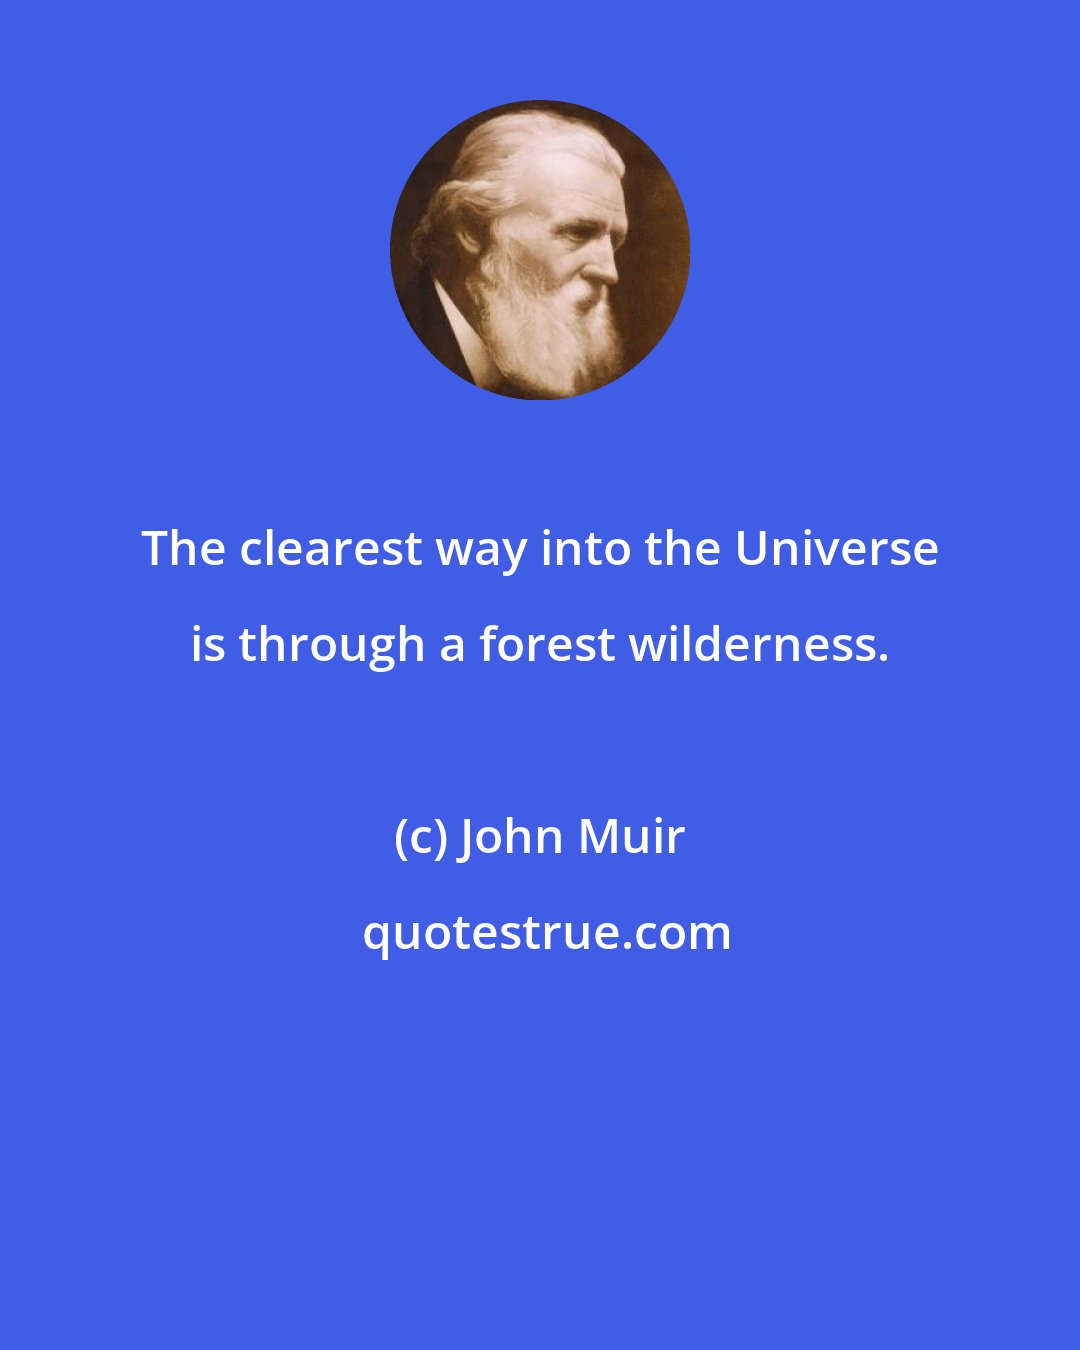 John Muir: The clearest way into the Universe is through a forest wilderness.